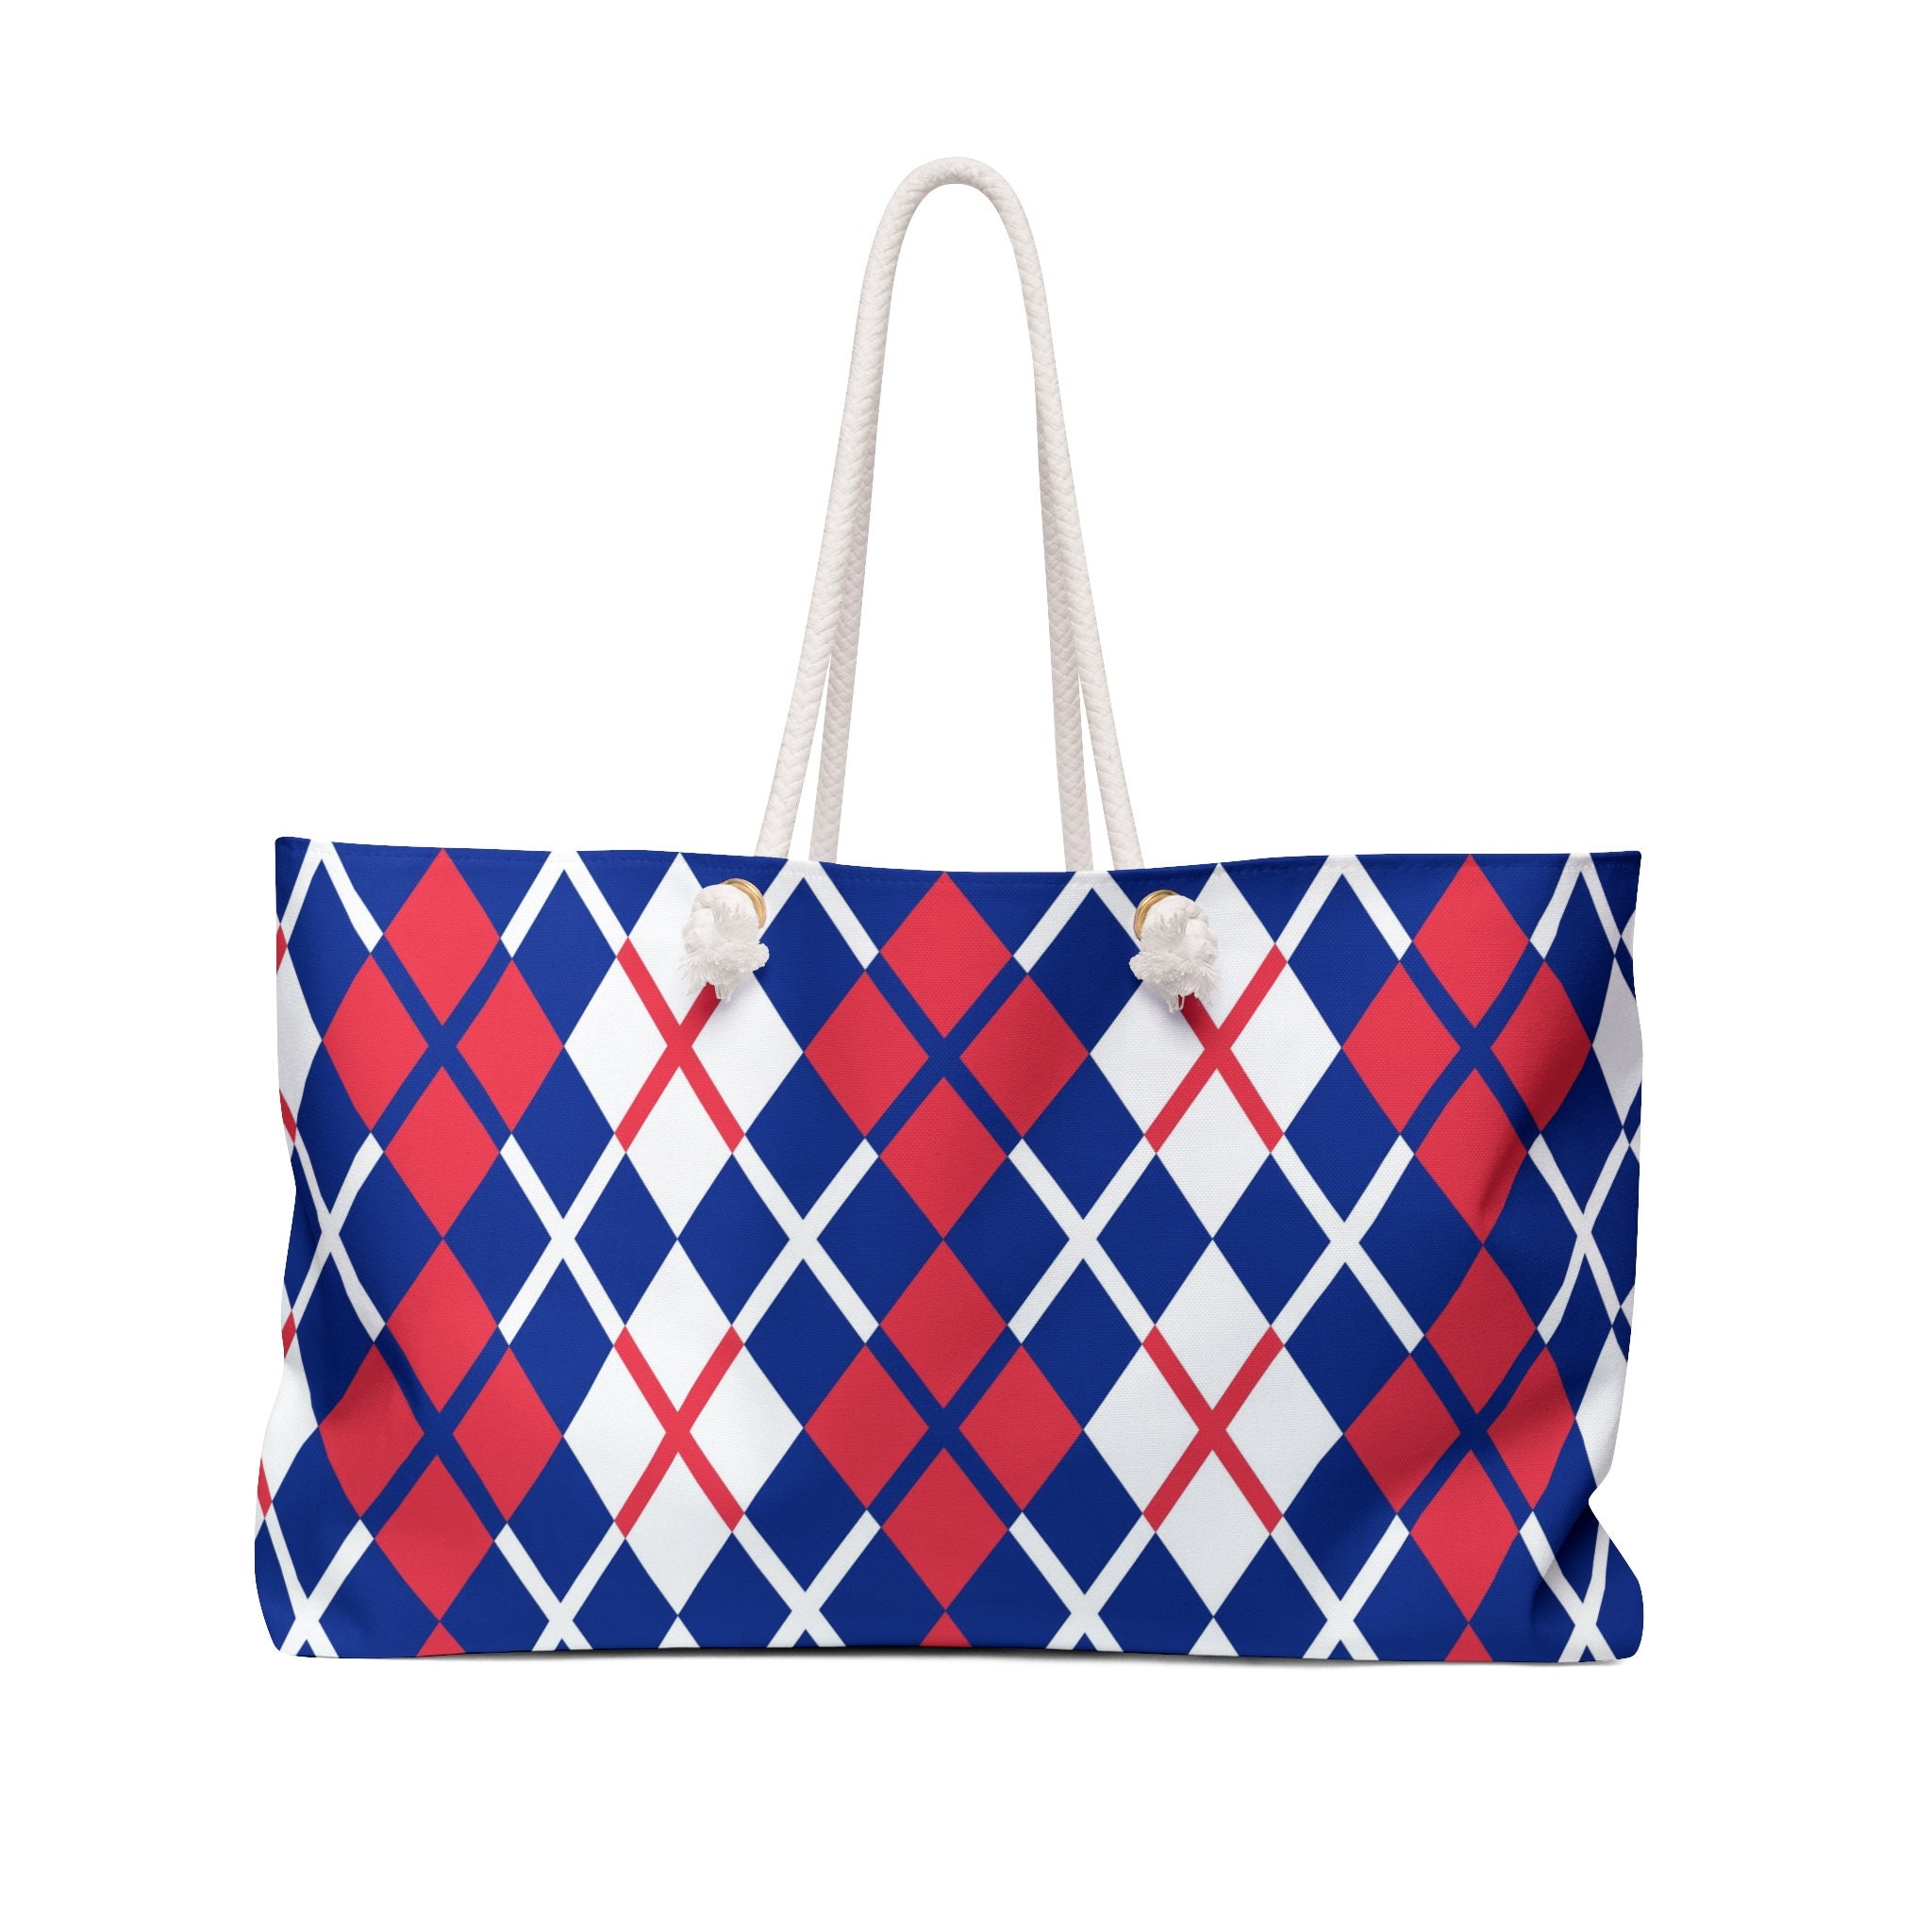 Here's a bag worth a few hundred likes. The fabled Red- White-Blue Laundry  Bag originating from Hong Kong in the 1960s. : r/AustralianNostalgia